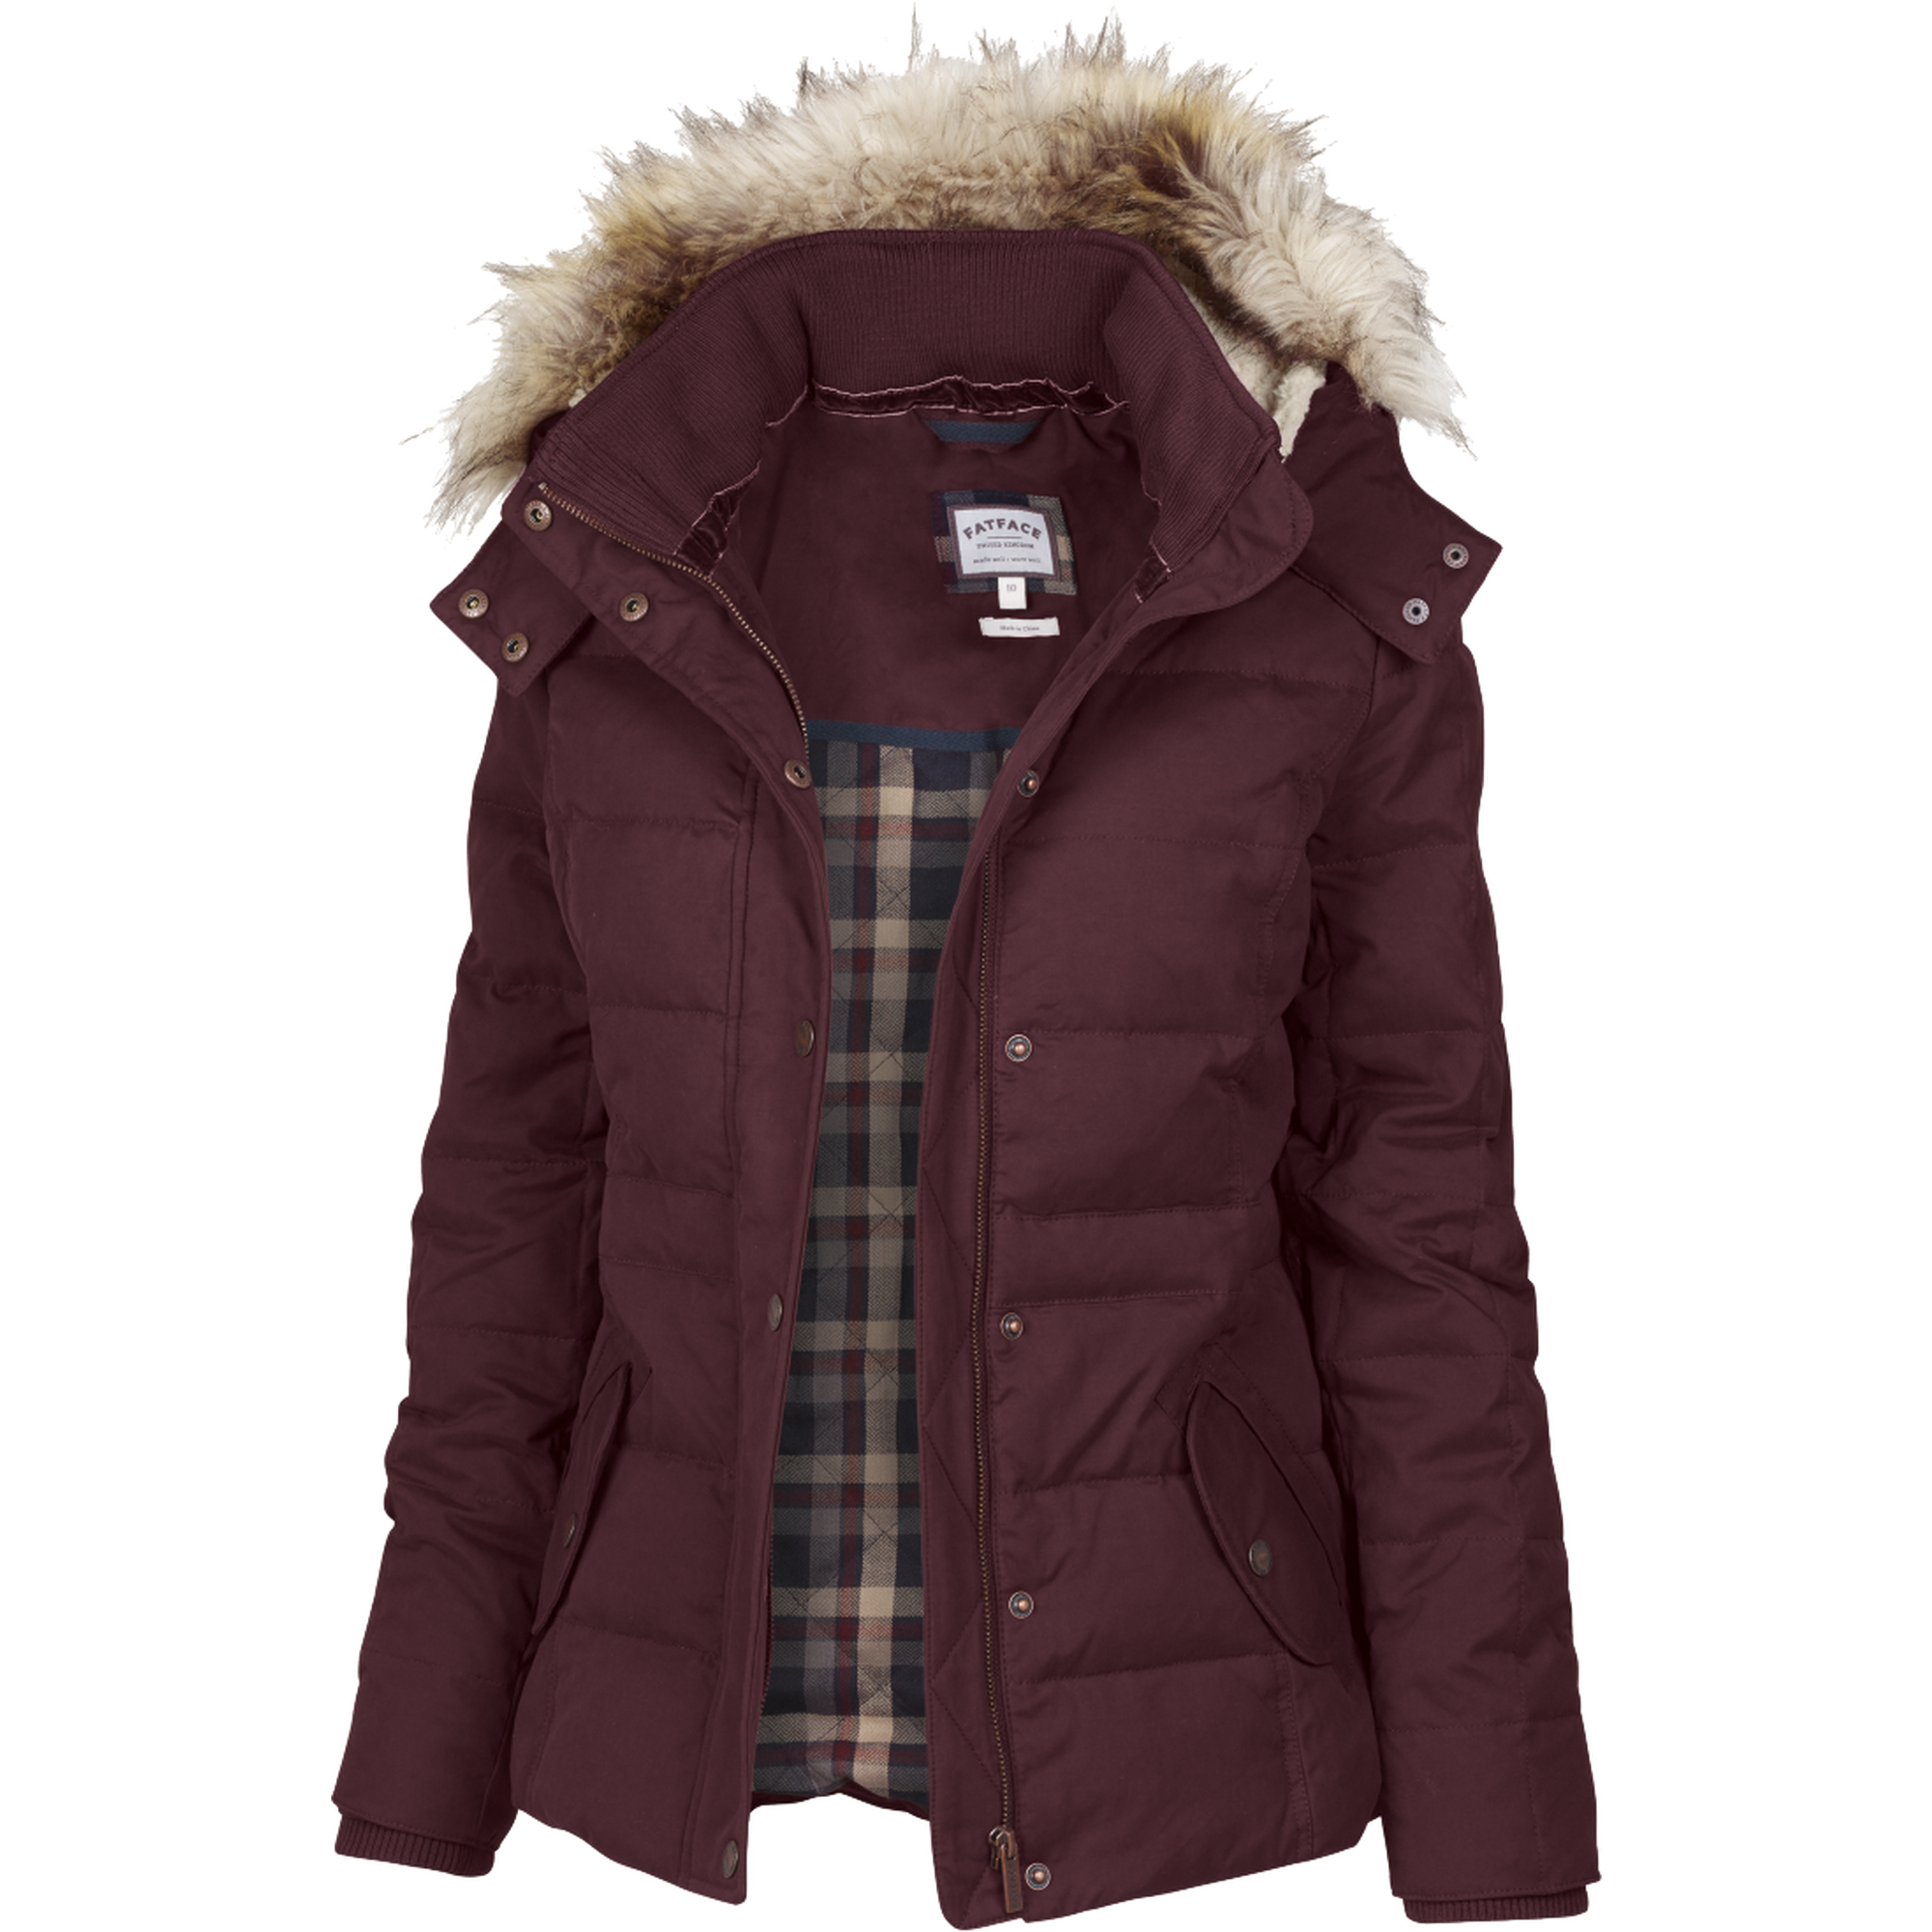 Pointon Short Puffer Jacket at Fat Face